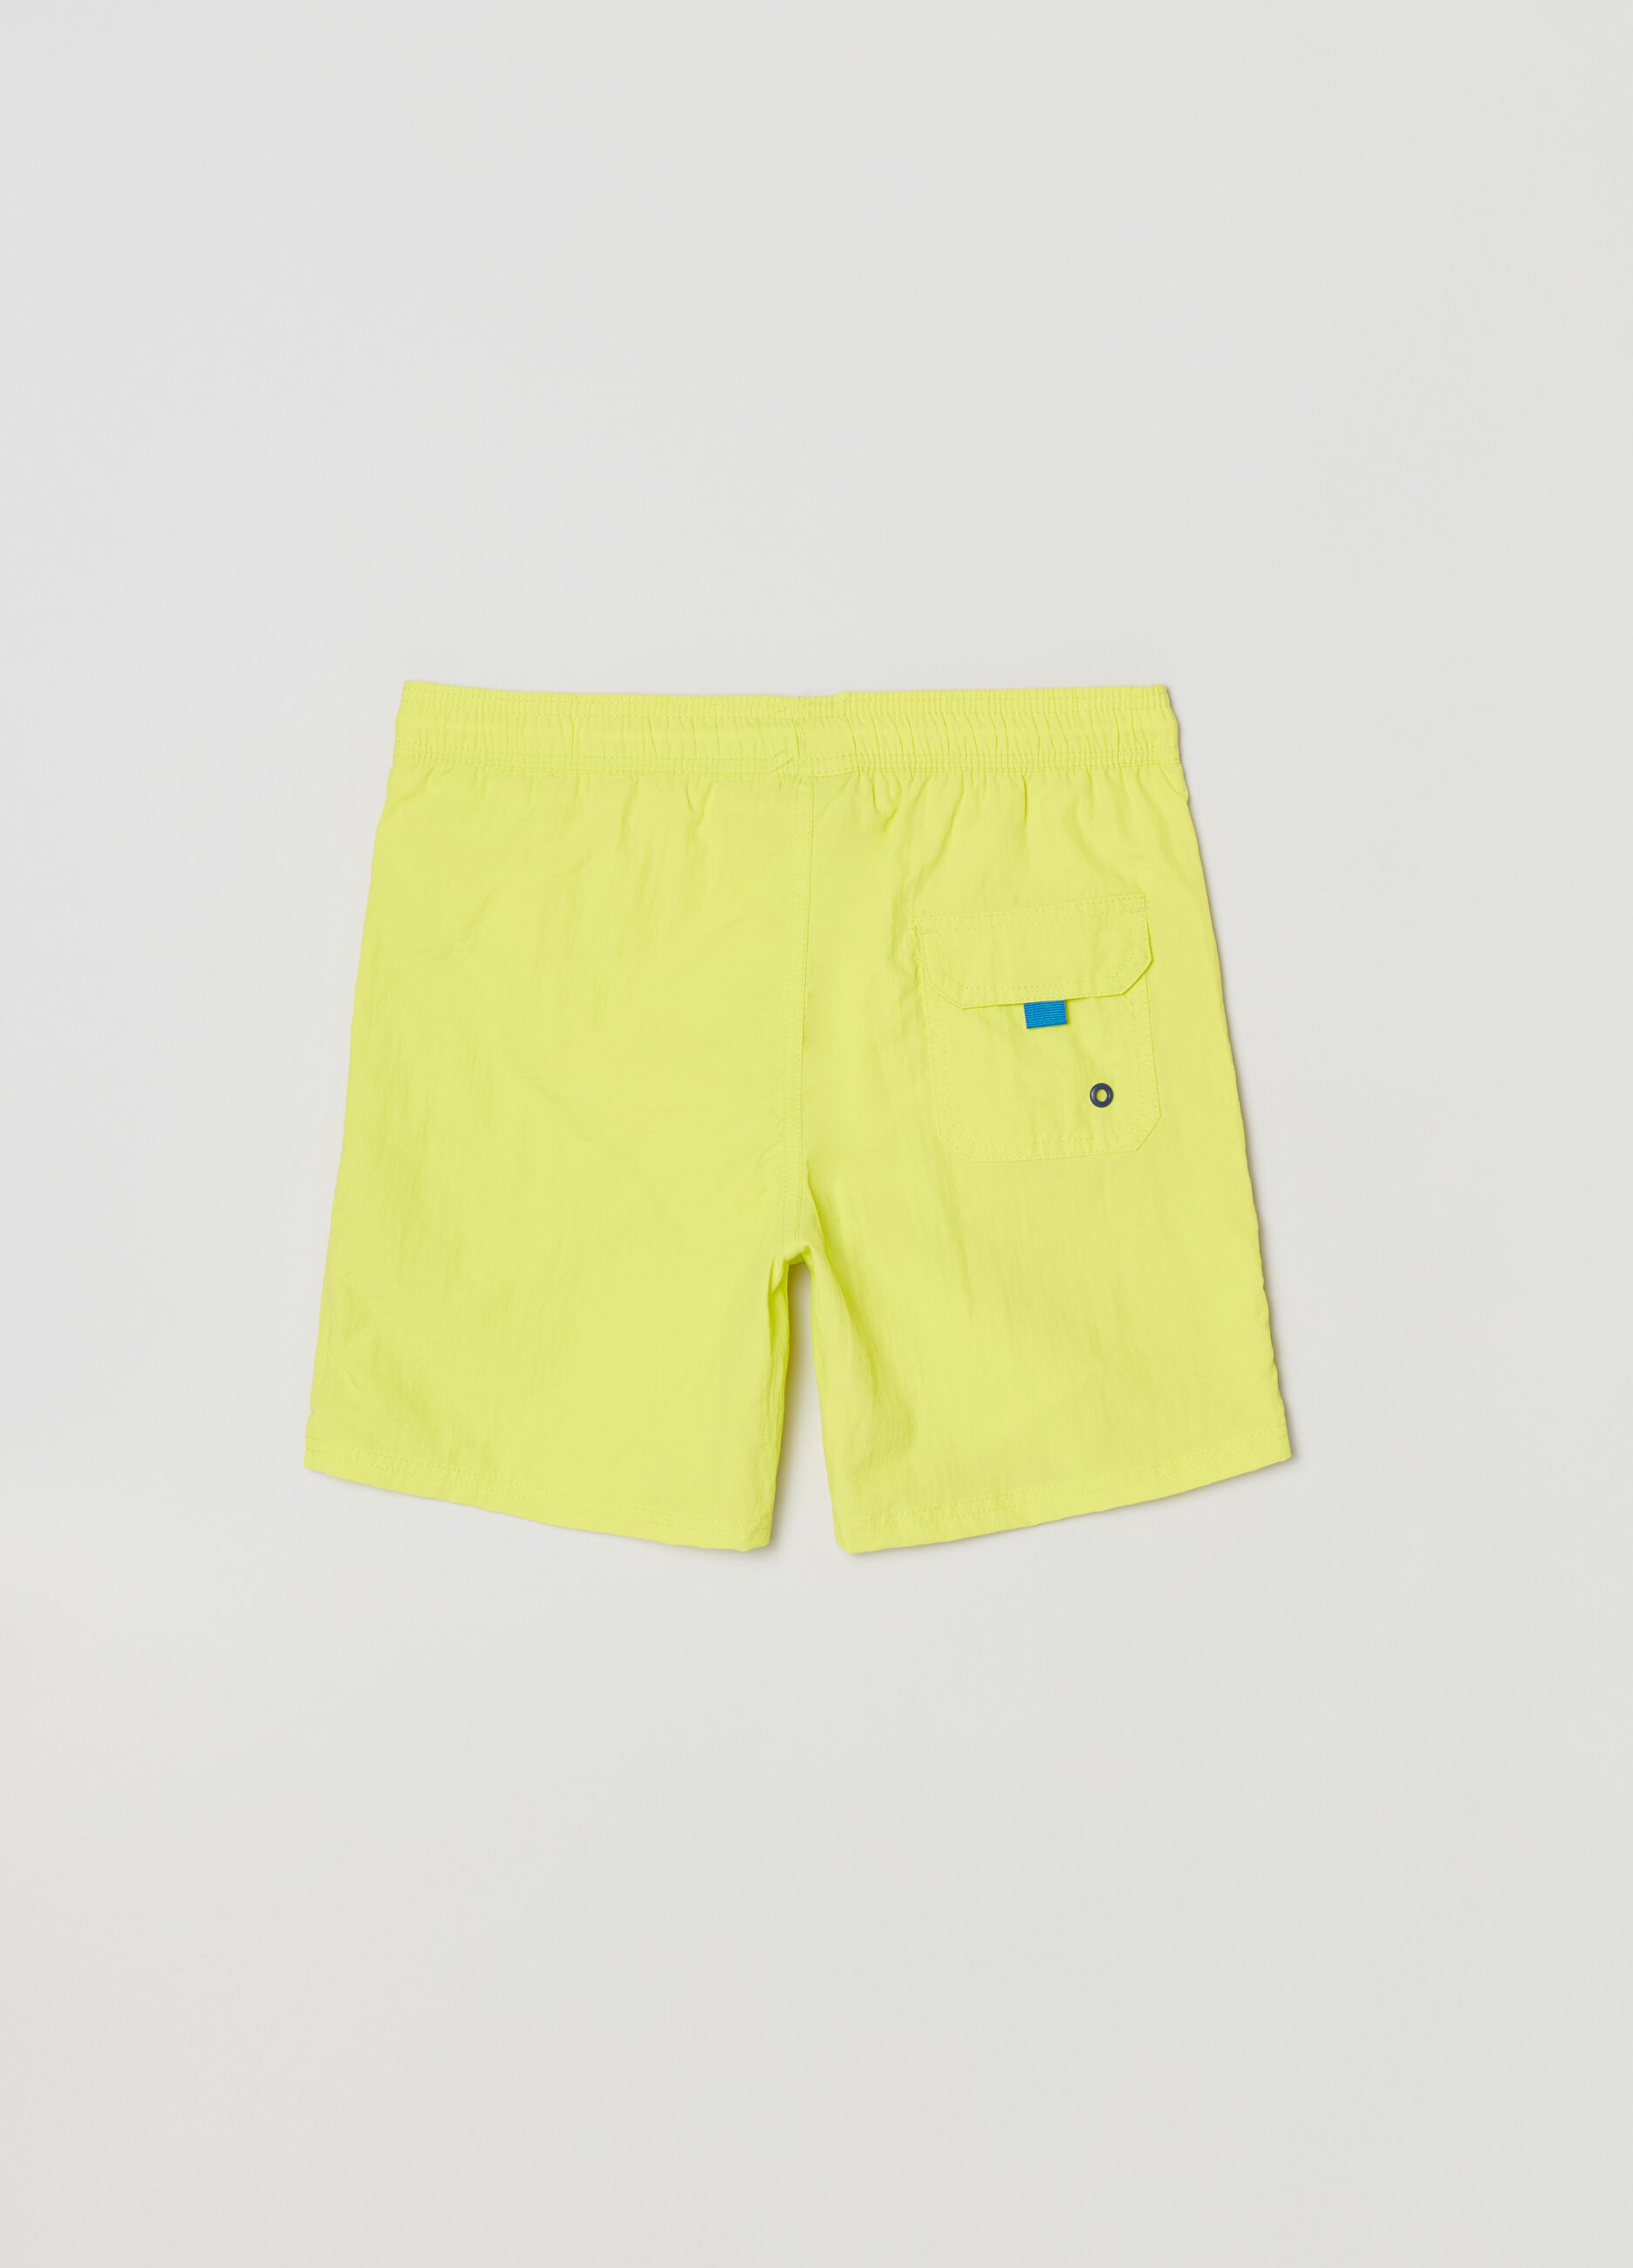 Swimming trunks by Maui and Sons